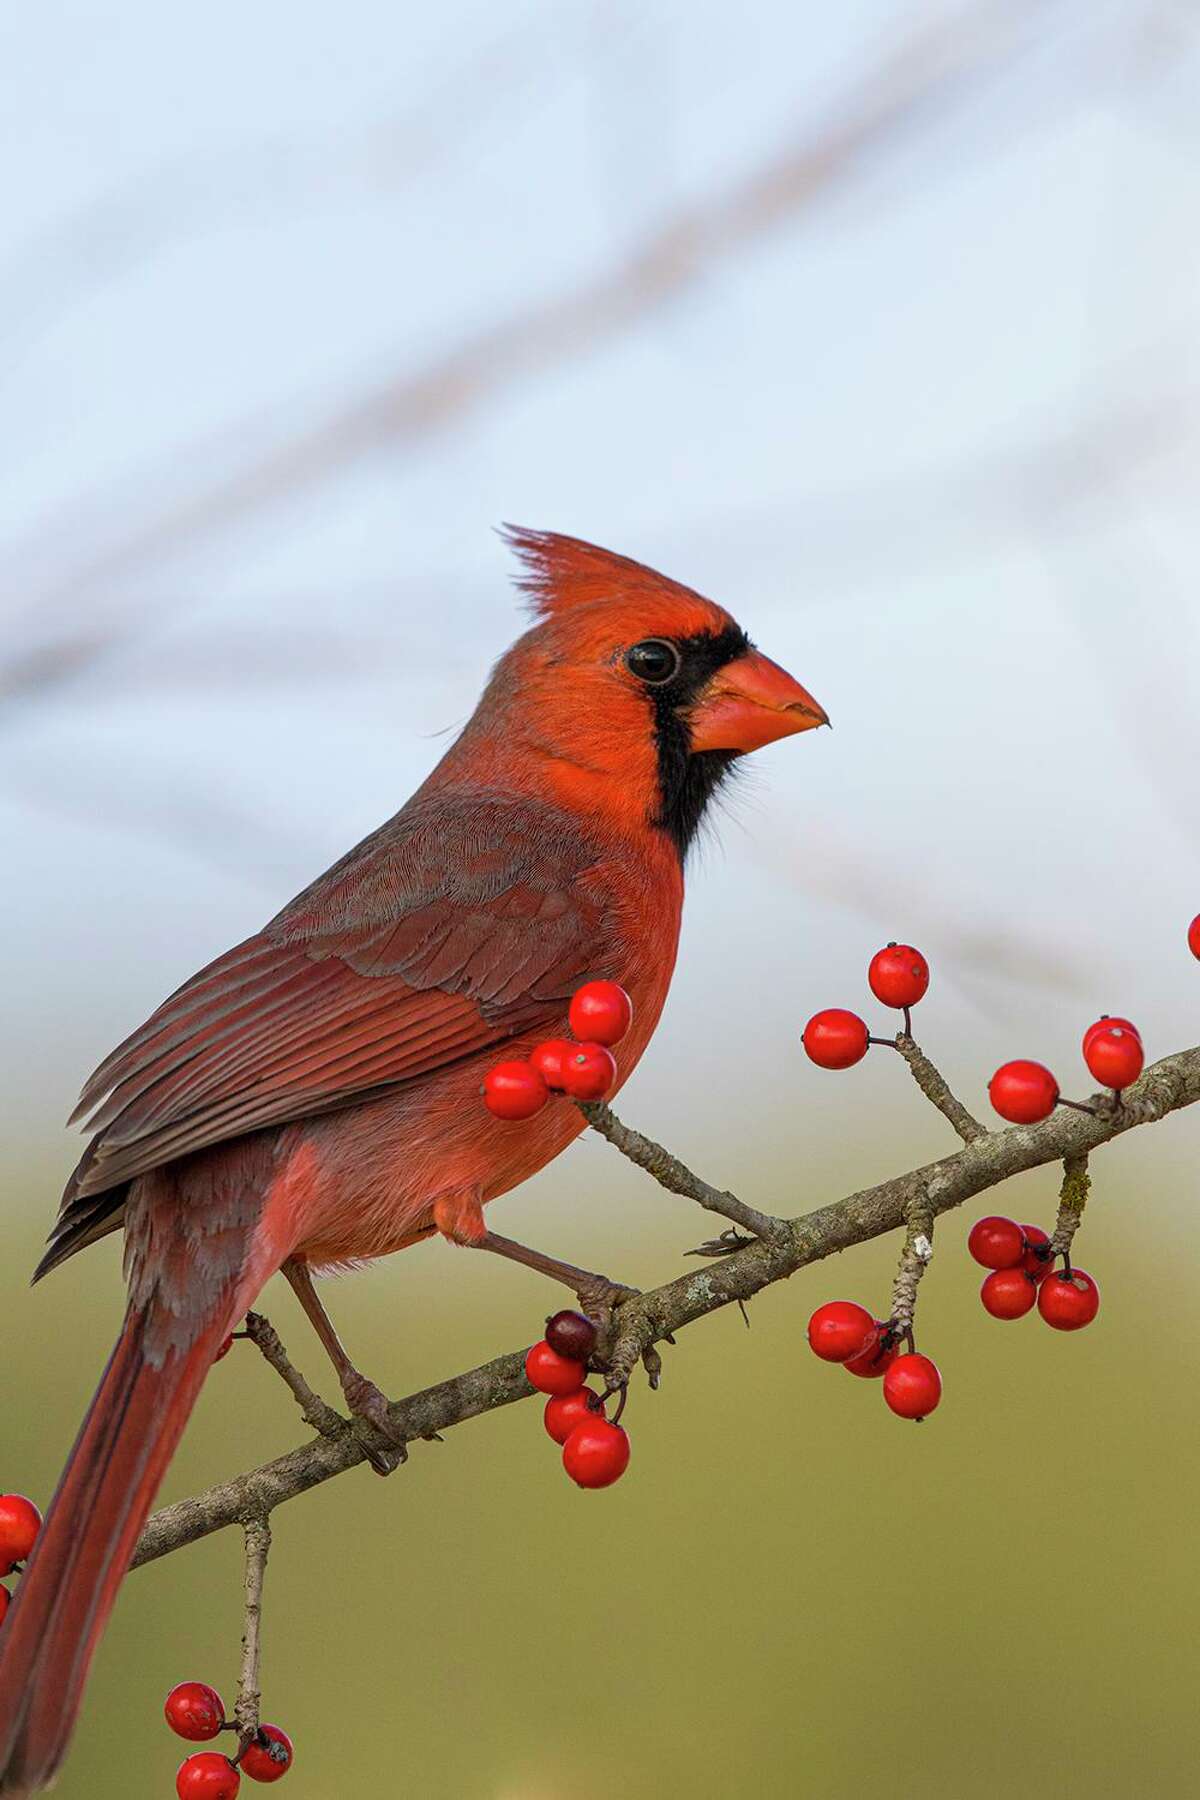 A bright red cardinal on a winter day in Texas is a boost to the holiday spirit. Photo Credit: Kathy Adams Clark. Restricted use.